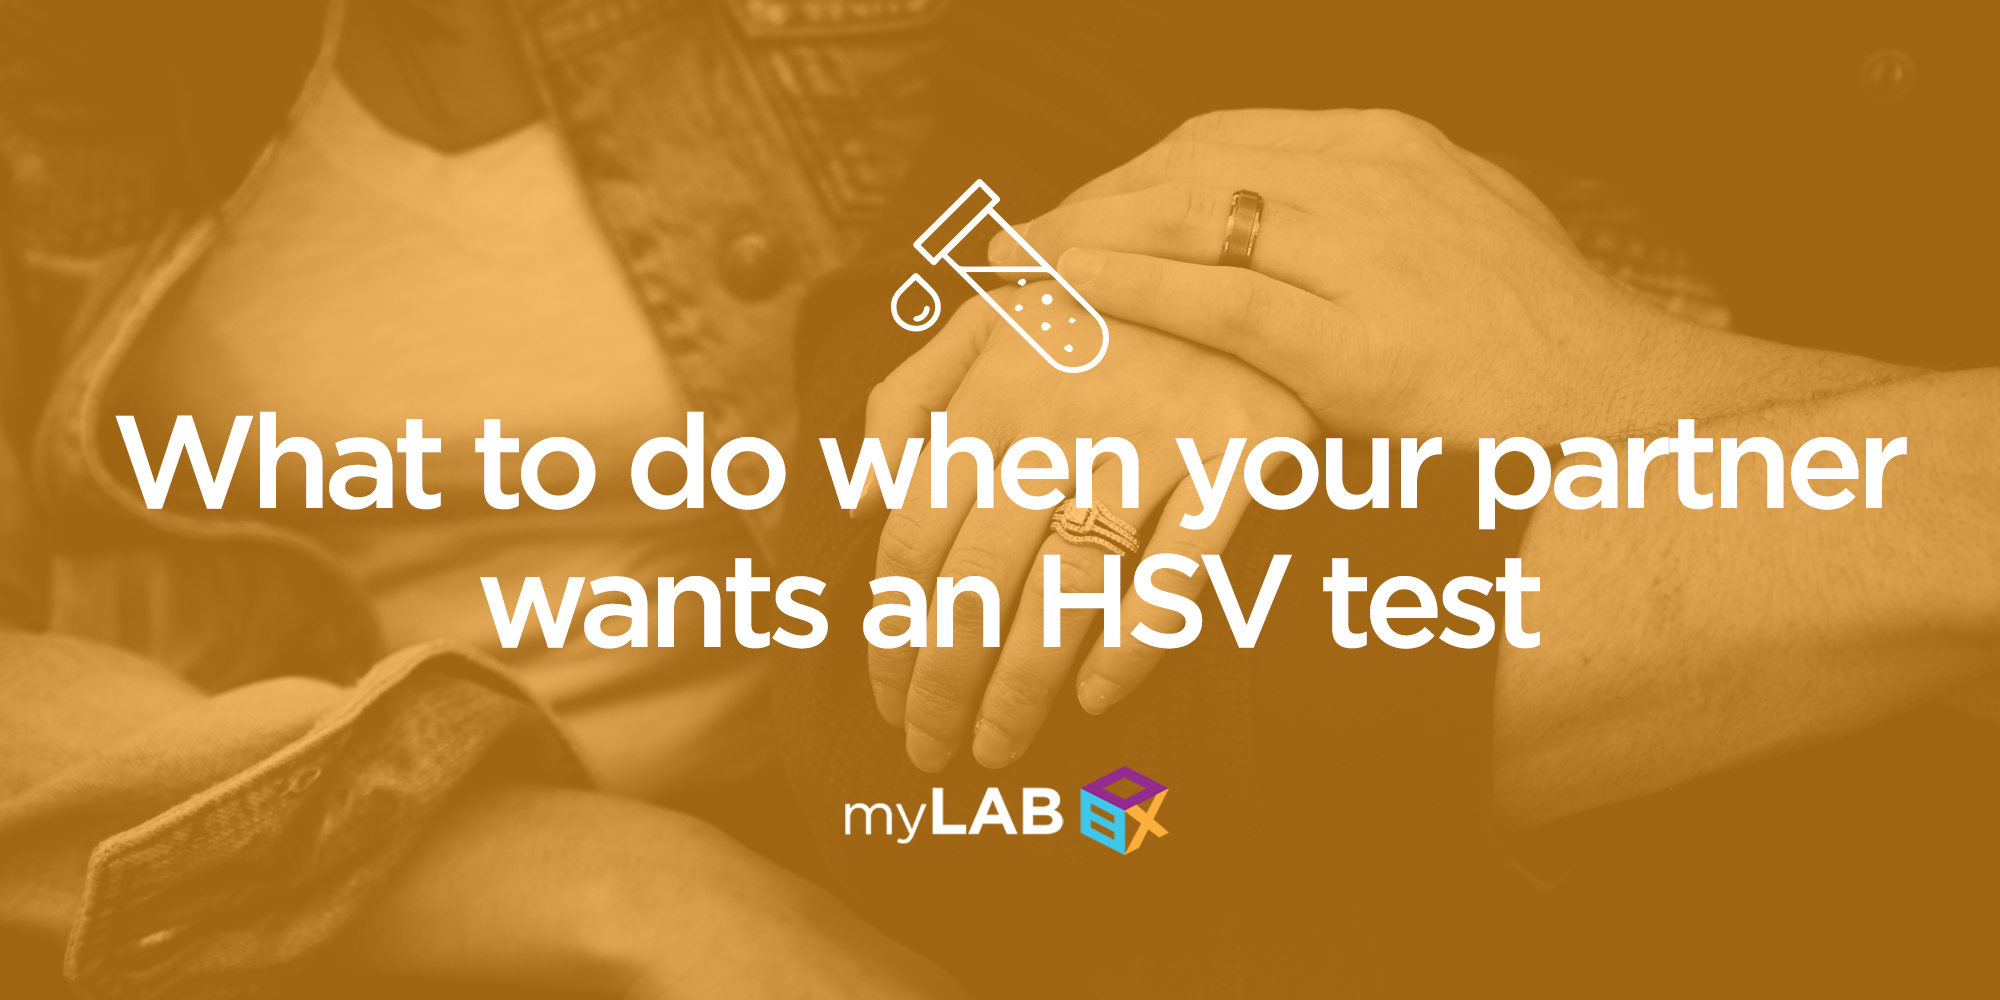 What to do when your partner wants an HSV test